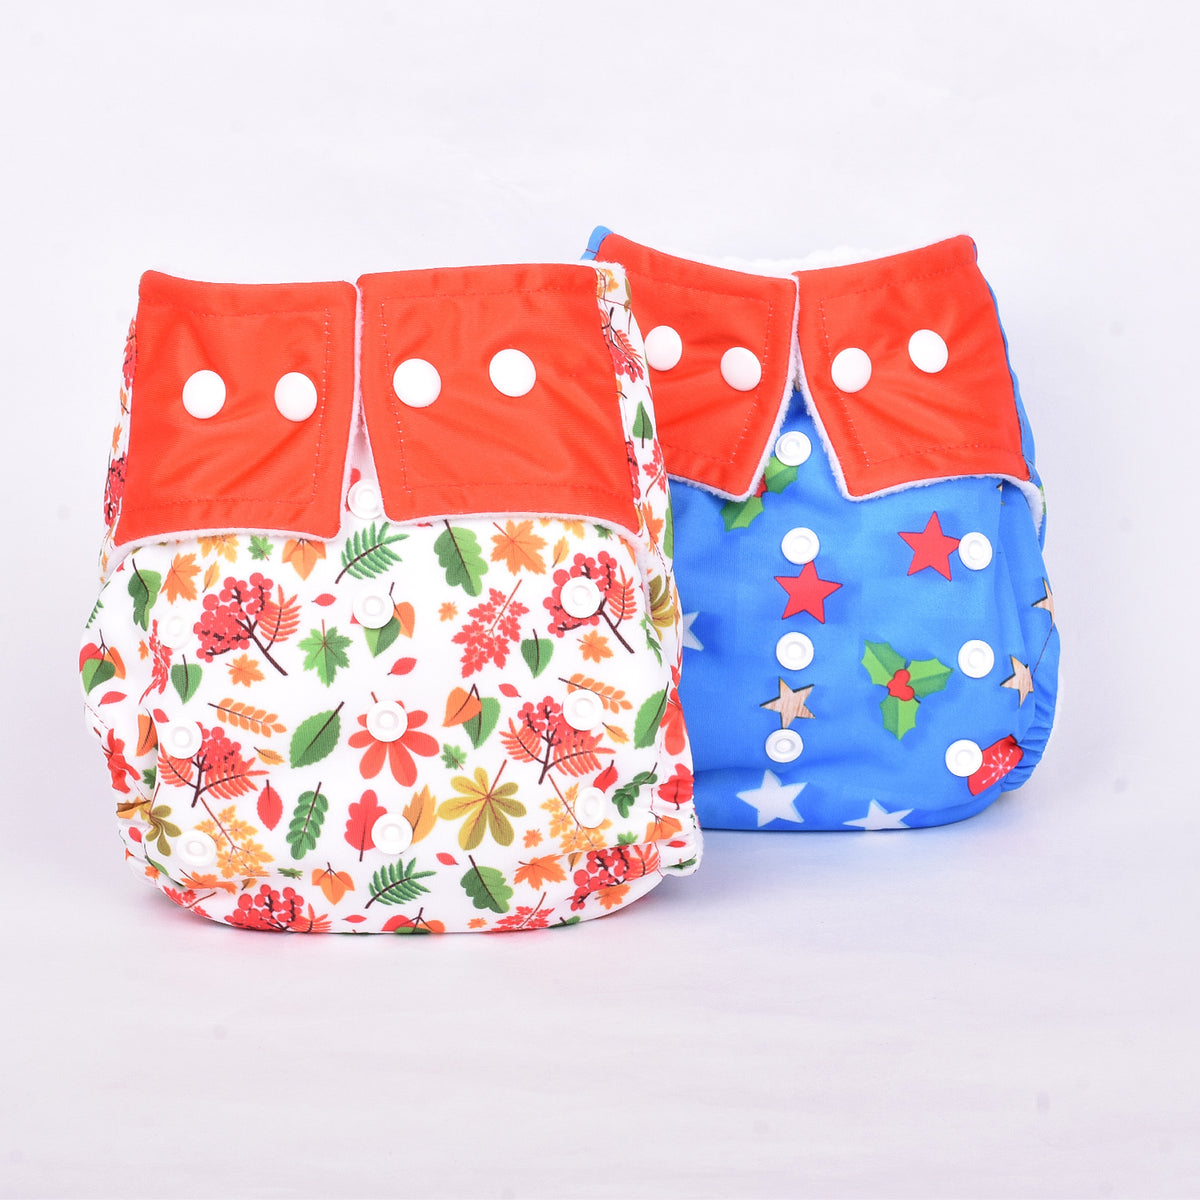 Baby Reusable Cotton Printed Pocket Diapers With 2 Inserts - Pack of 2 Flower, Star